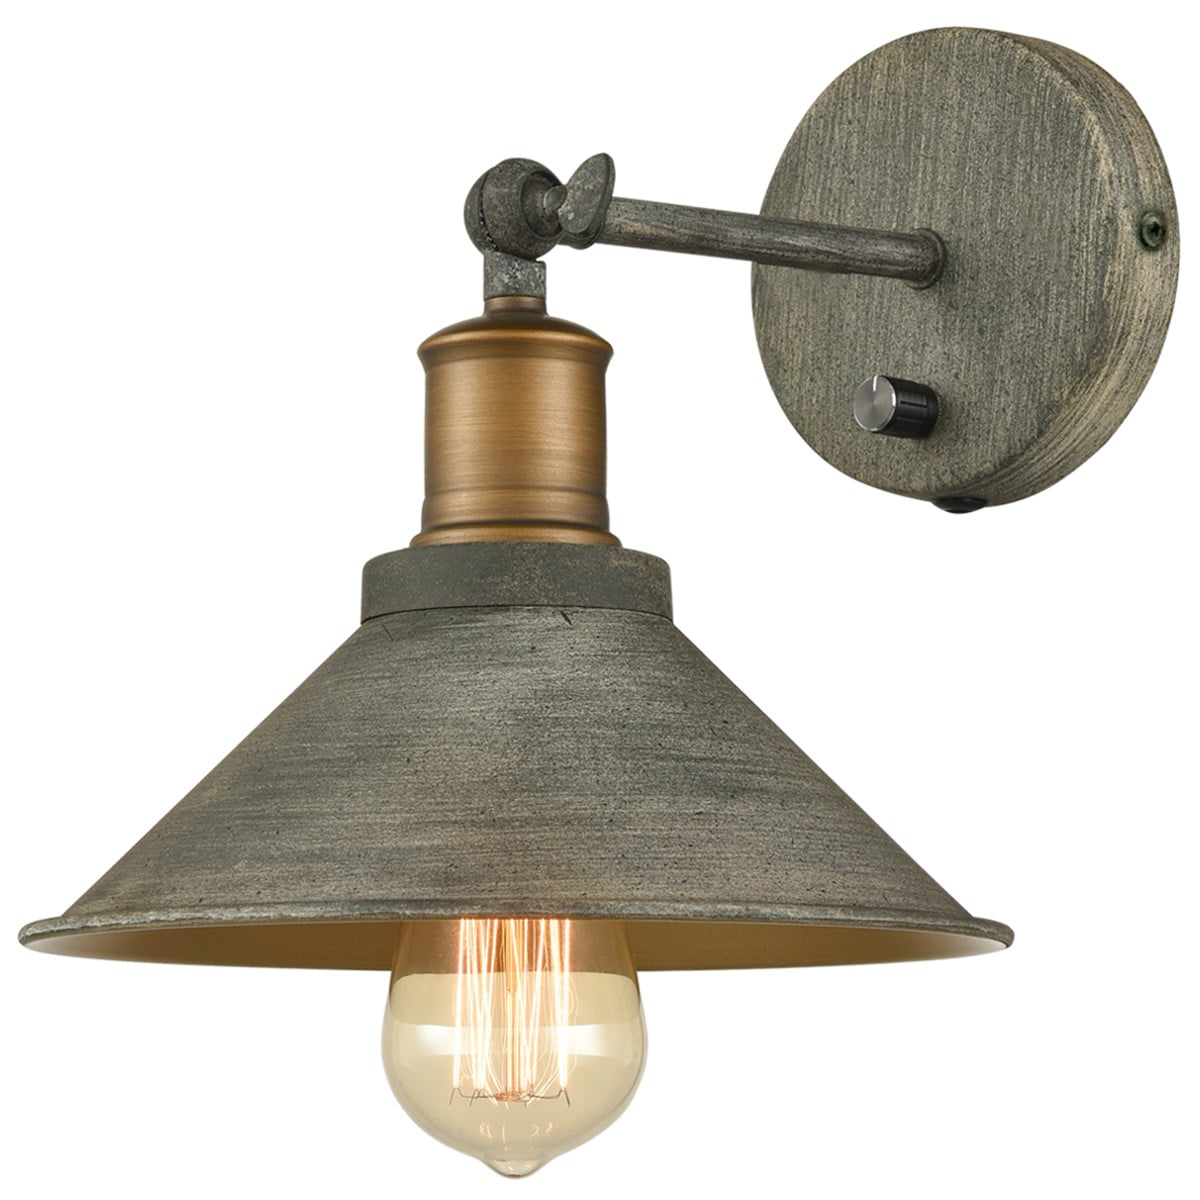 MODERN VINTAGE INDUSTRIAL WALL LIGHT IRON WALL LAMP DOUBLE ARMS RUSTIC SCONCE 